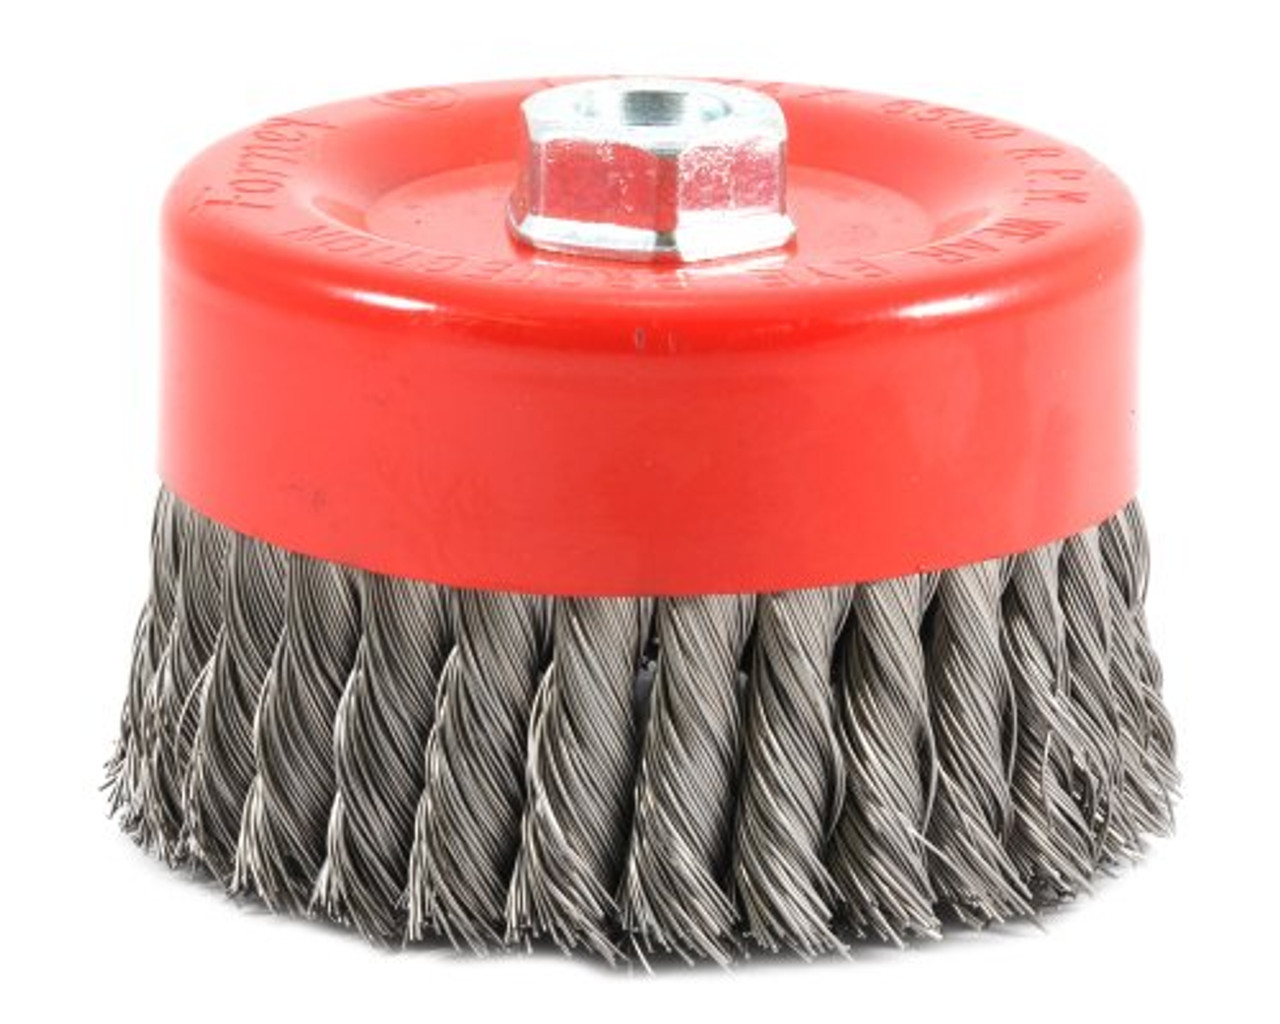 Forney 72756 6-Inch by 5/8-11 Knotted Cup Brush .020 Carbon Steel